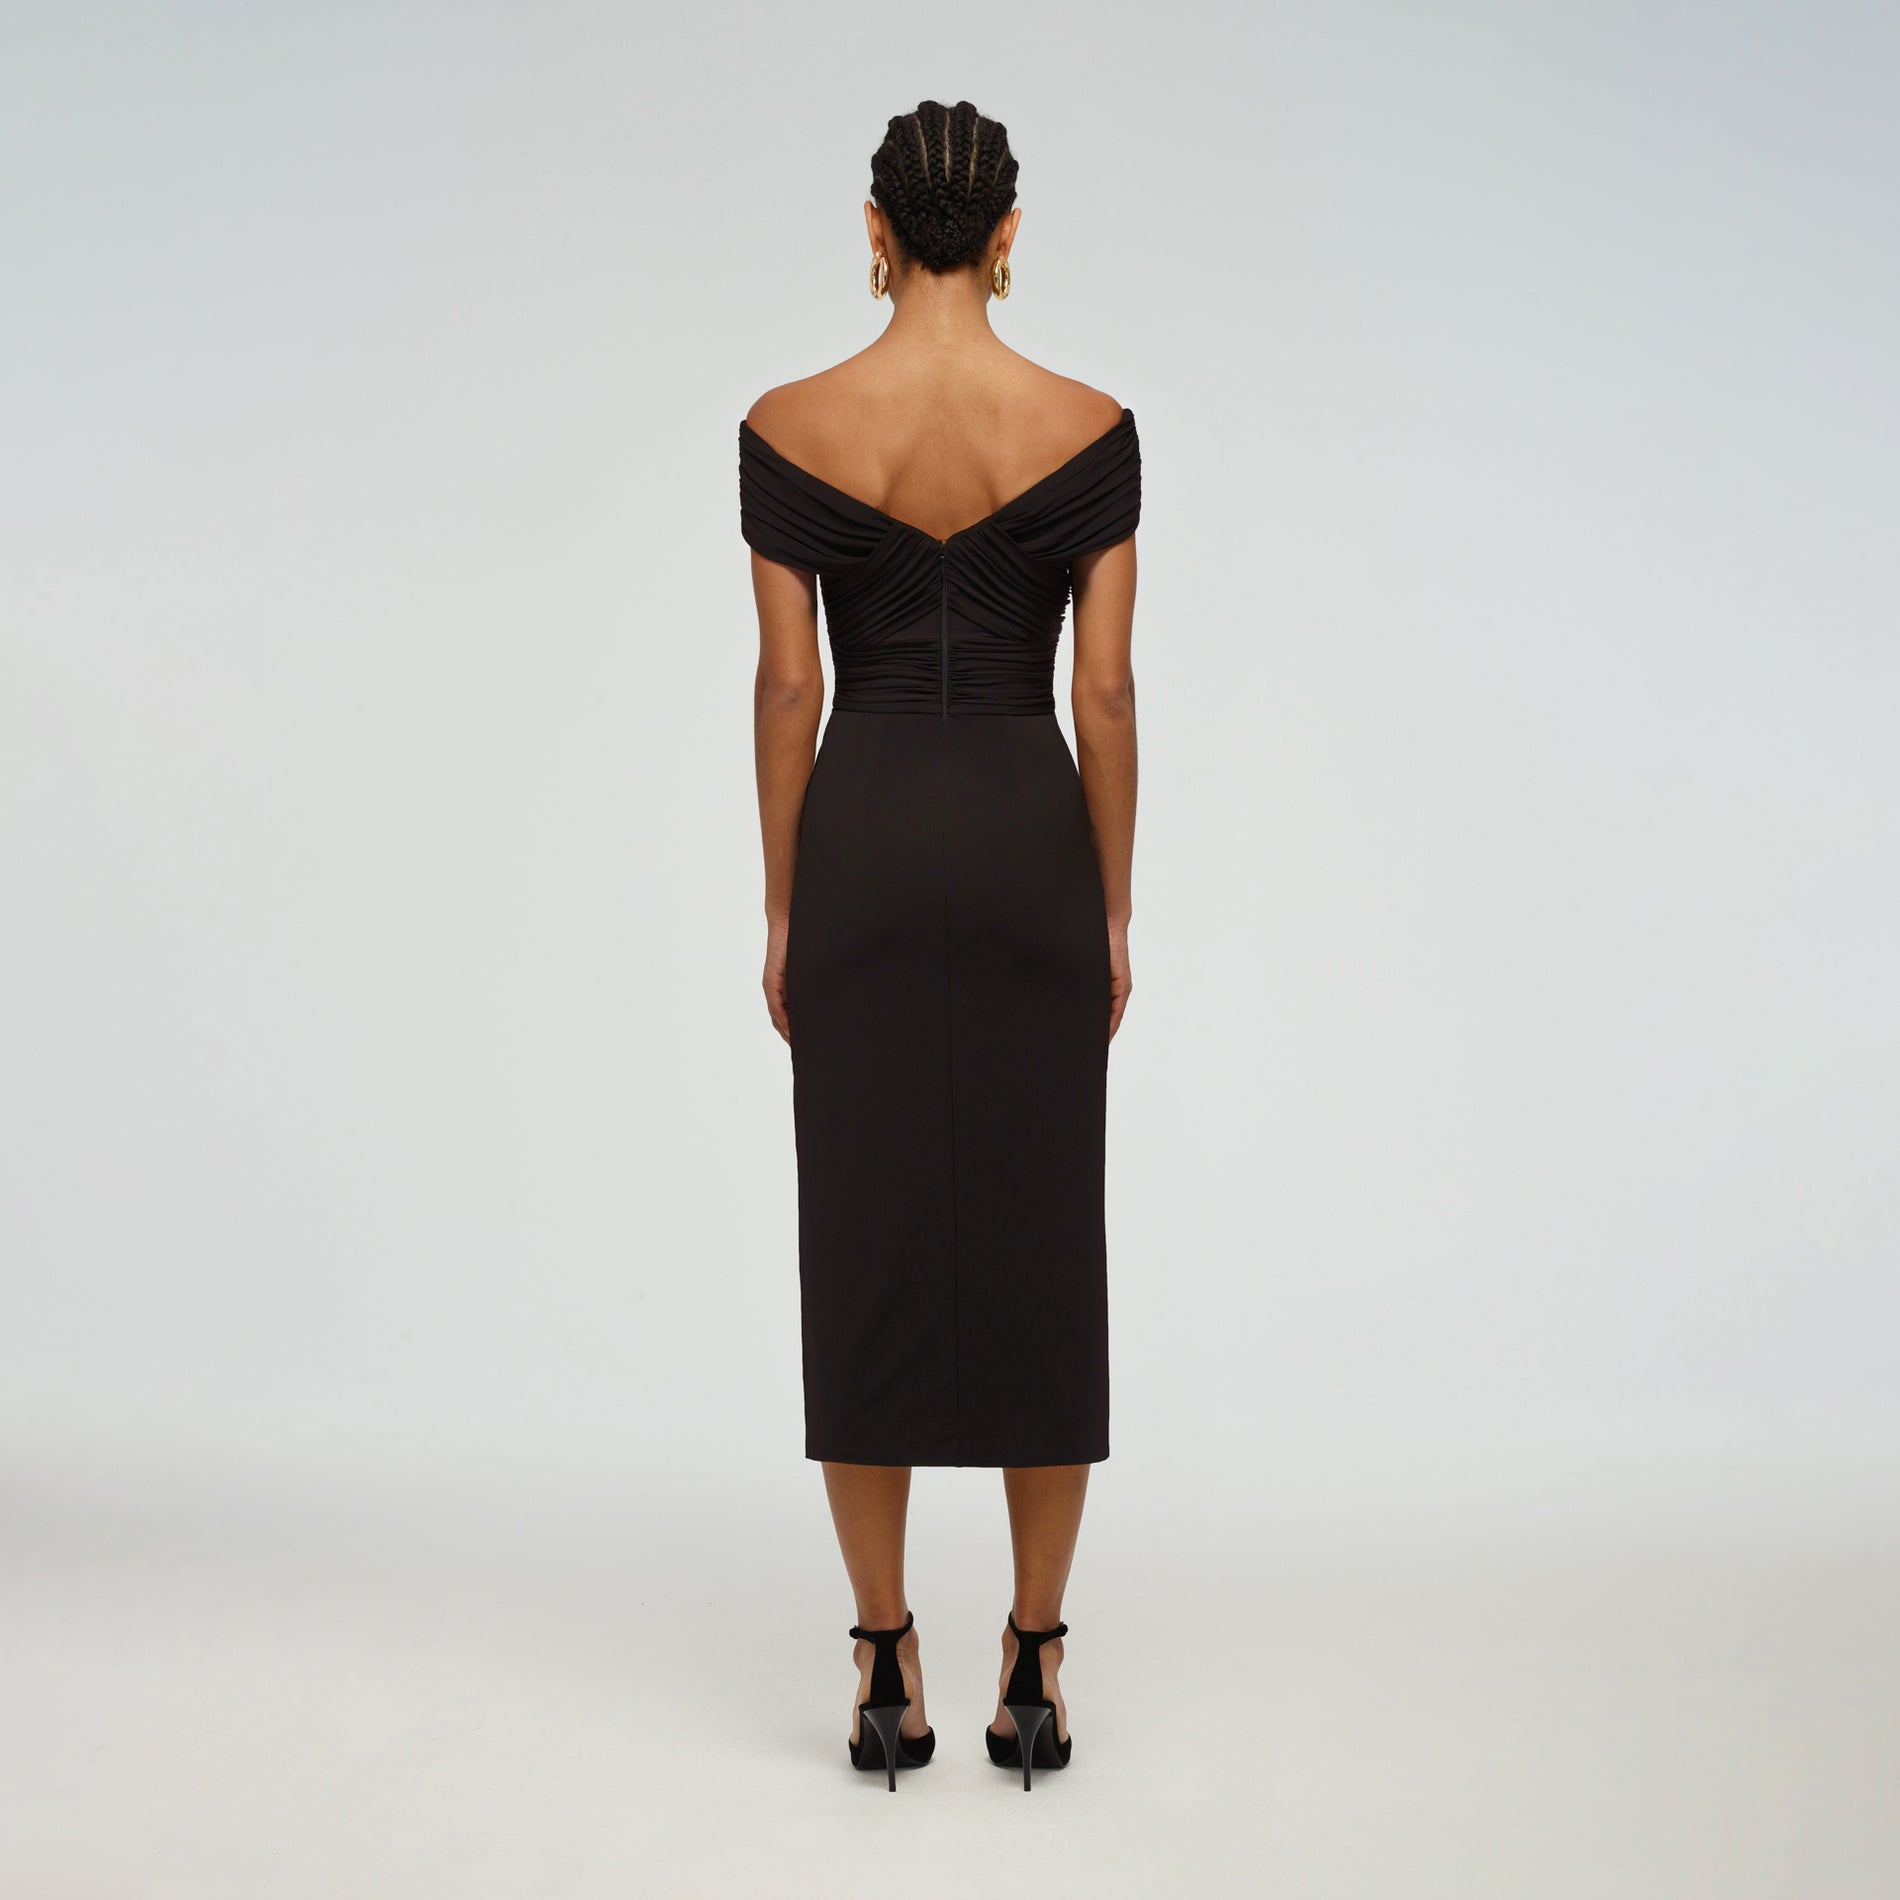 A woman wearing the Crossover Midi Dress